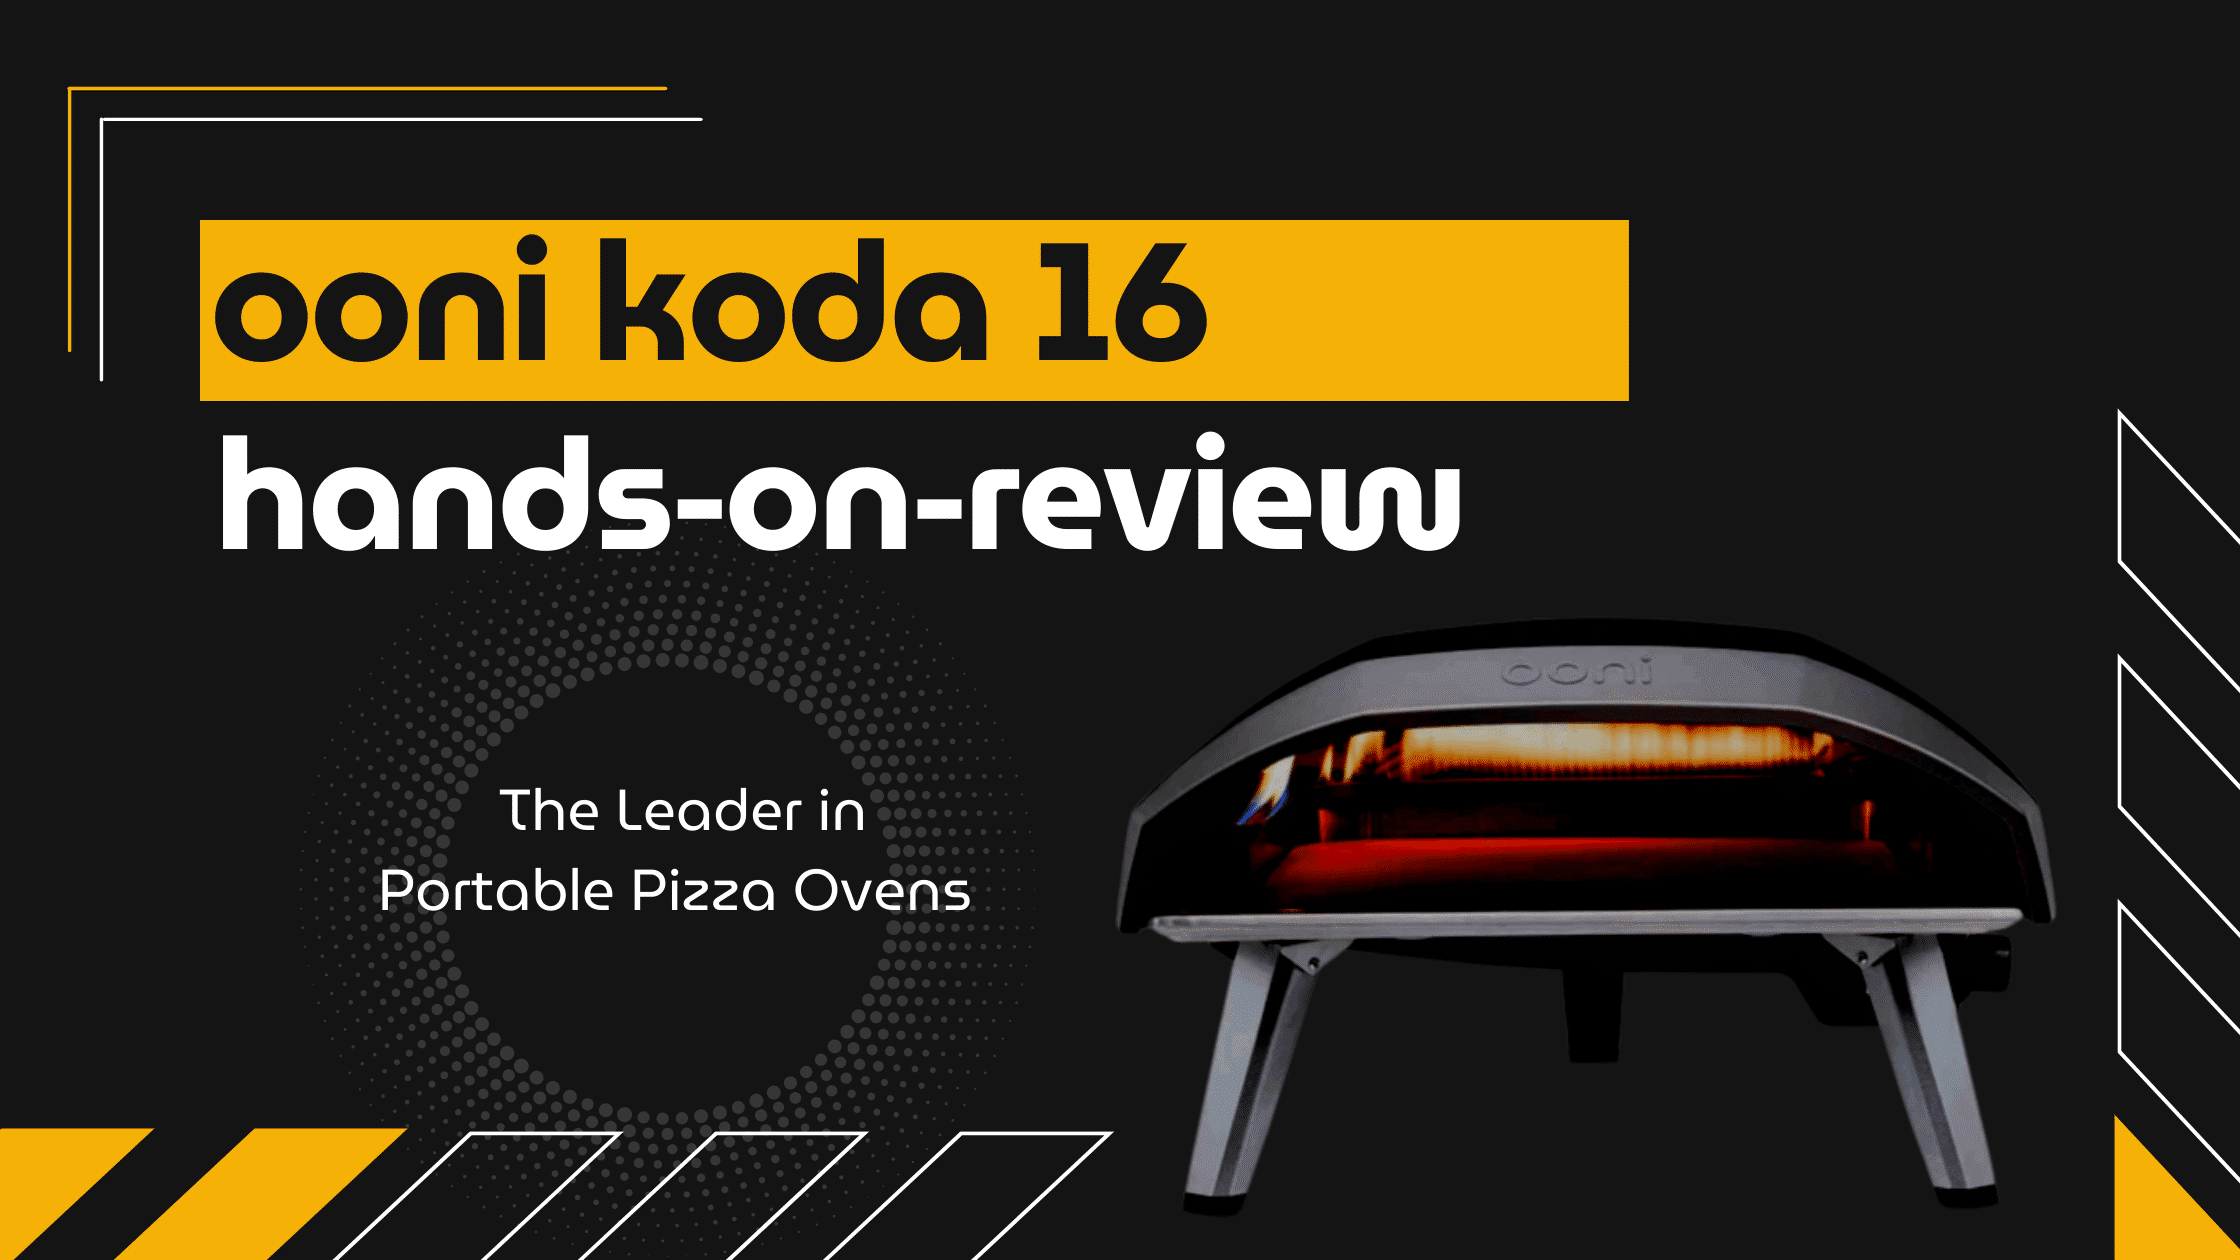 Ooni Koda 16 Review [Find Why the Koda 16 is the #1 Portable Pizza Oven Recommended by the PROs in 2022]